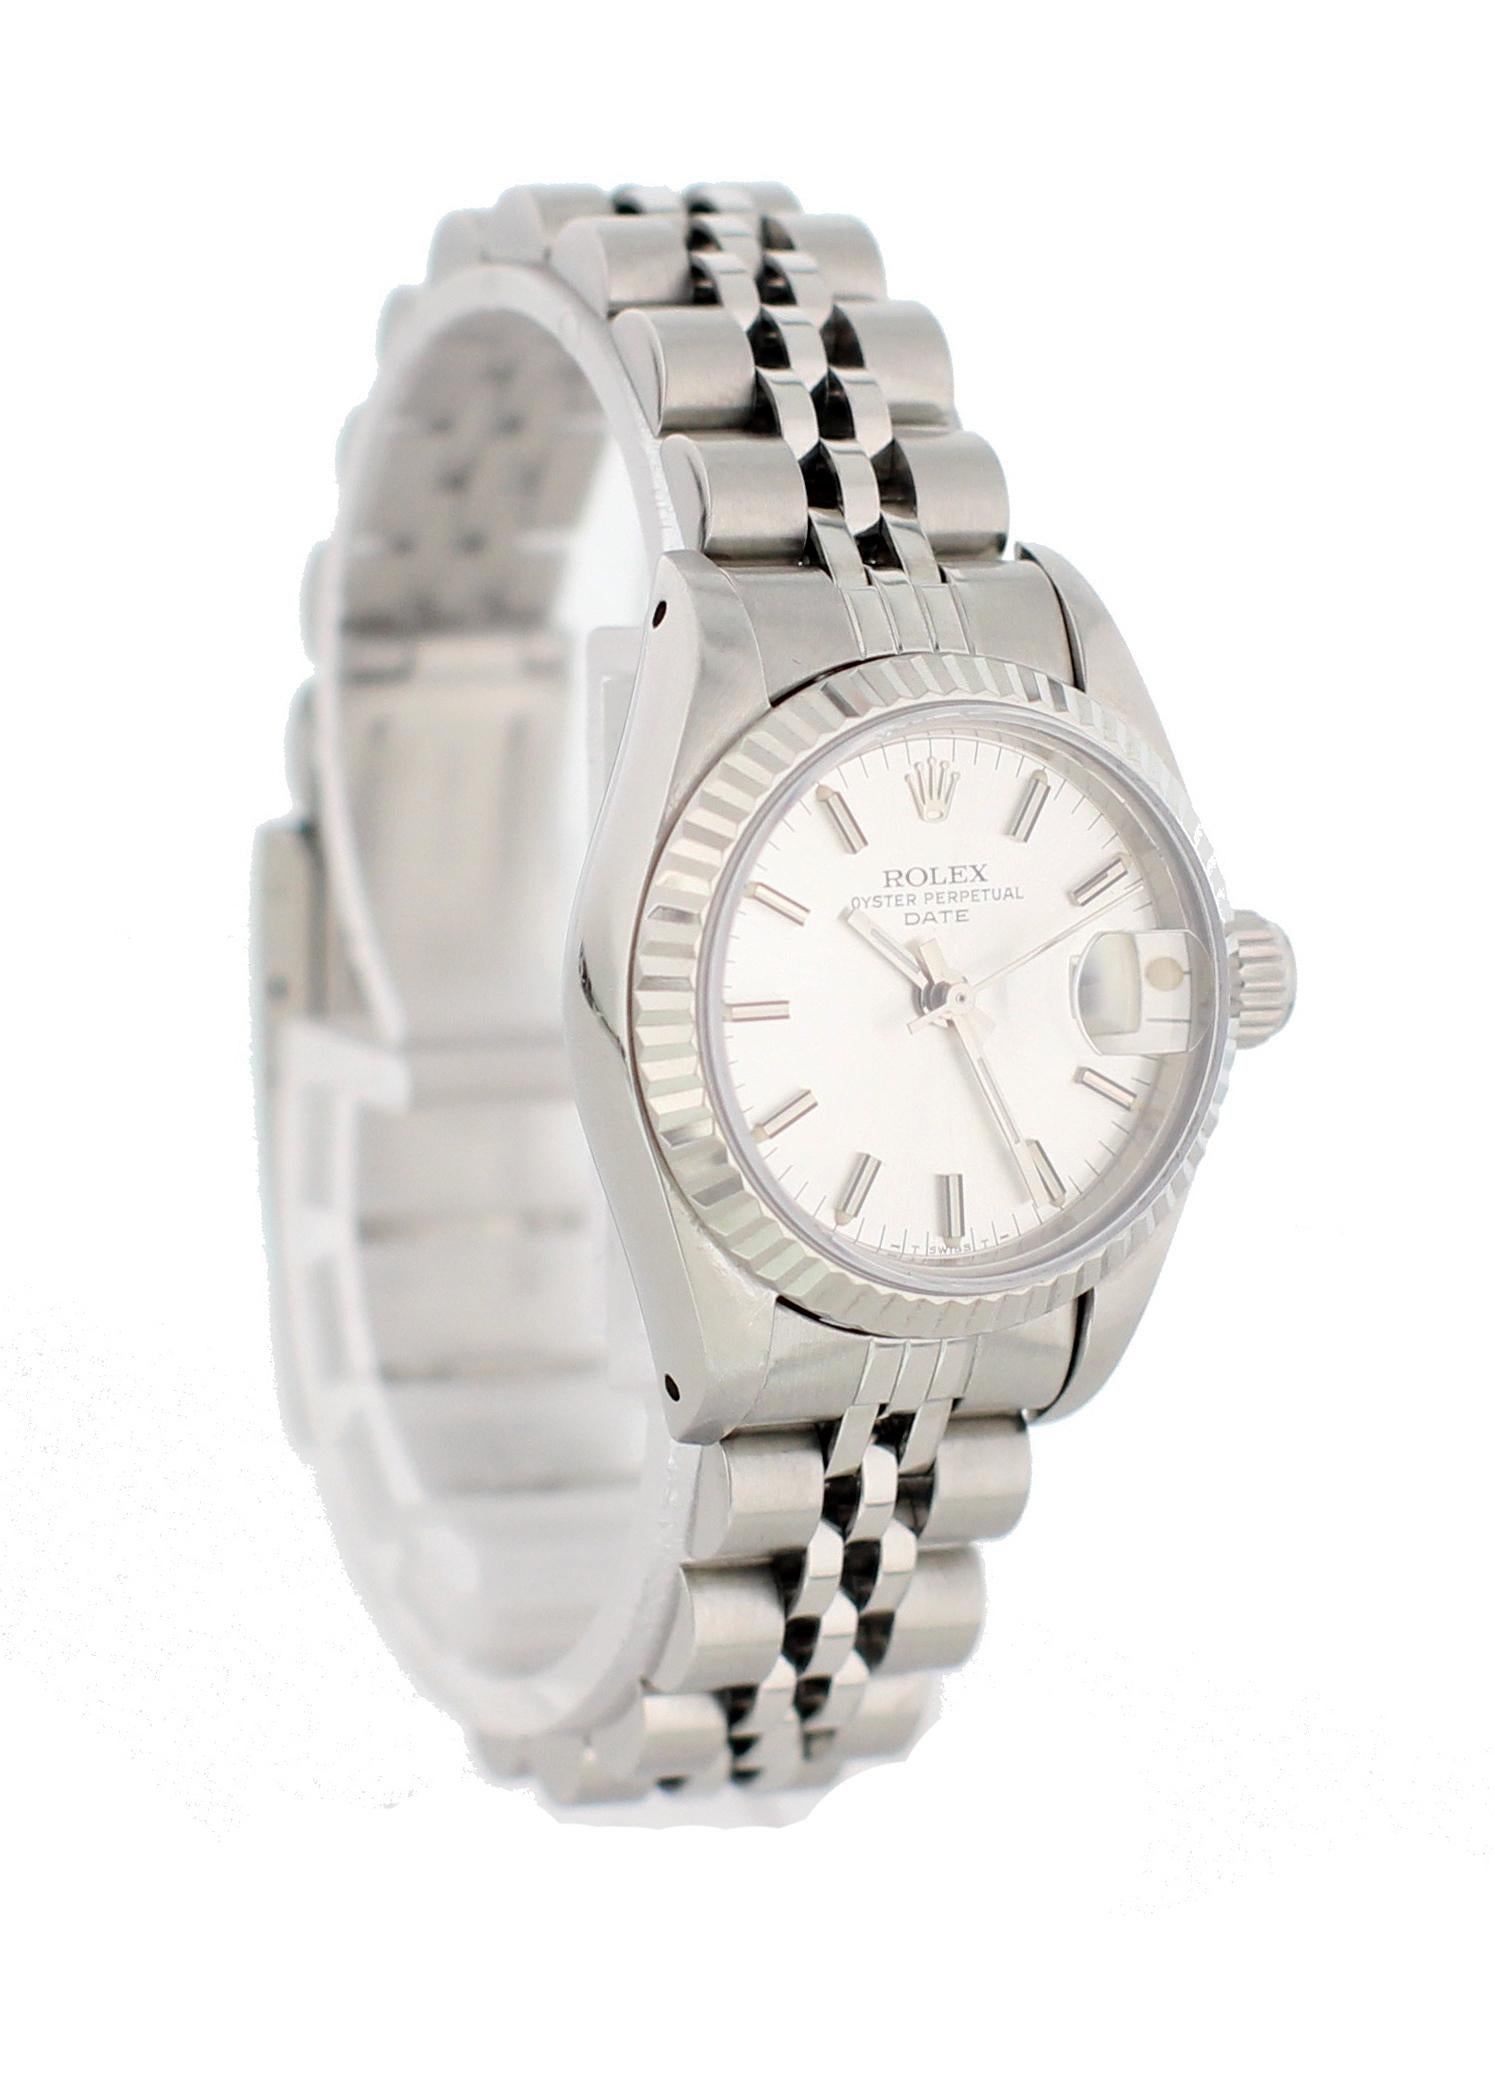 Rolex Oyster Perpetual Datejust 69174 Ladies Watch In Excellent Condition For Sale In New York, NY